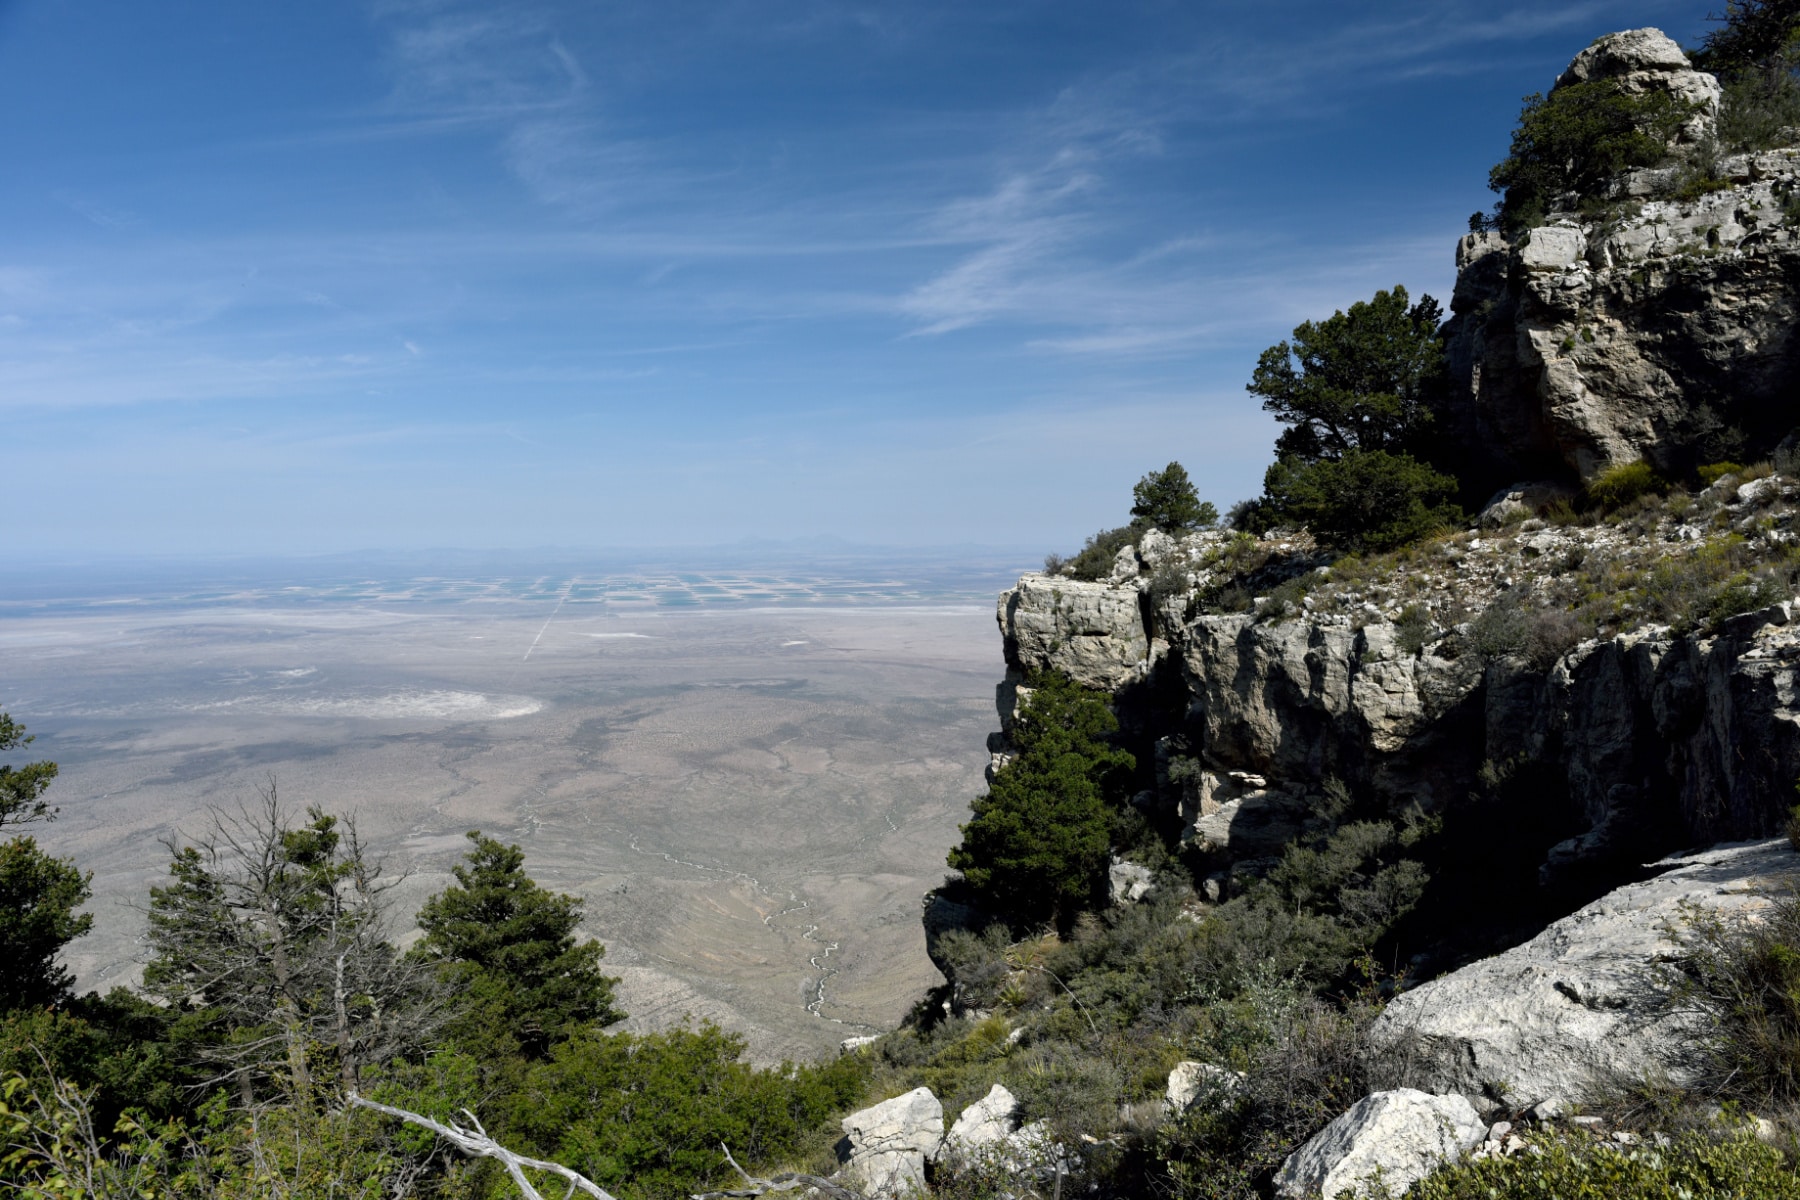 A view from the Bush Mountain Trail in Guadalupe Mountains National park shows the steep views and distant agricultural land of West Texas.